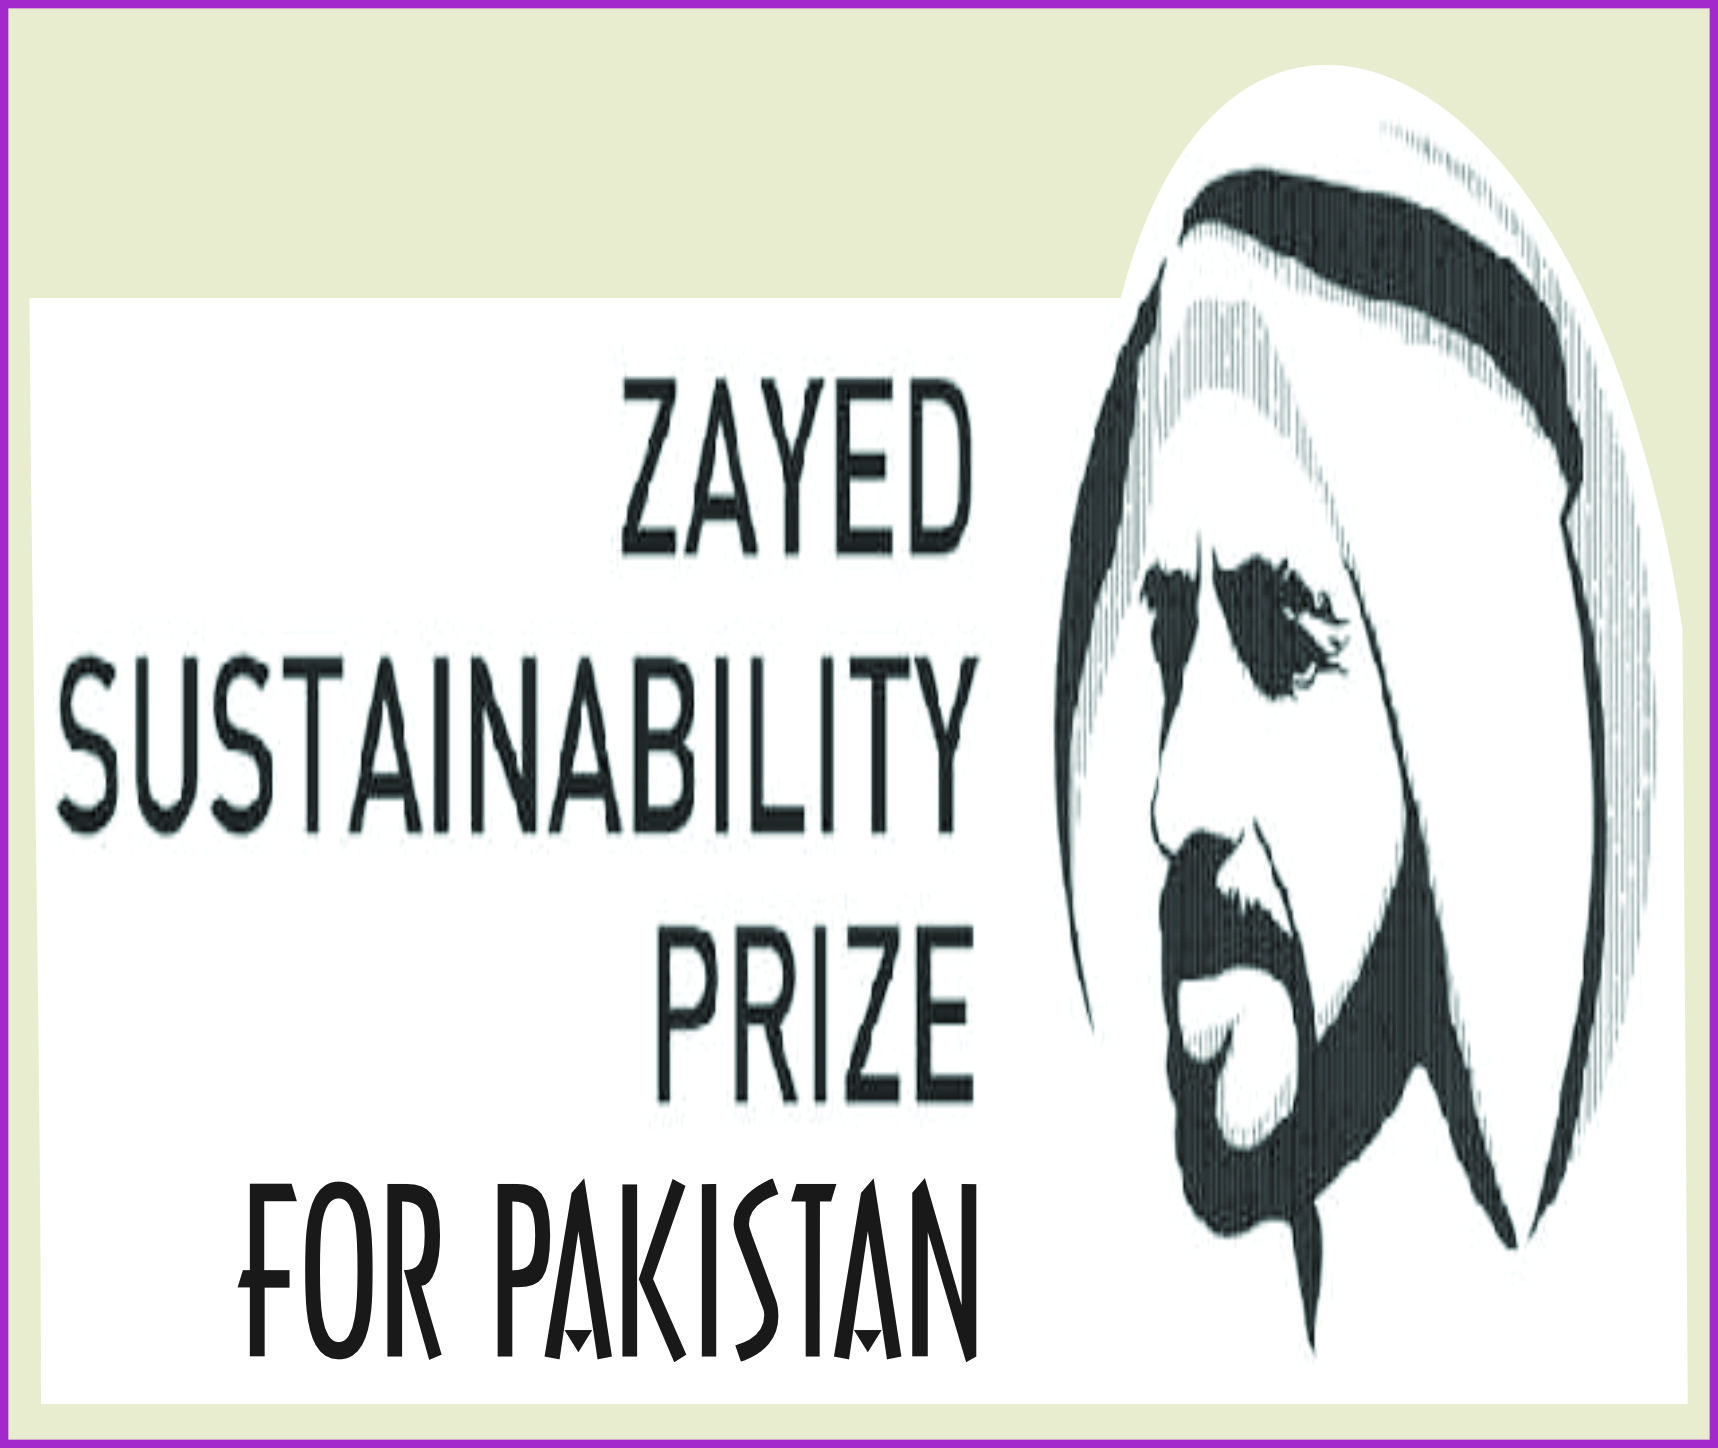 You are currently viewing Zayed Sustainability Prize for Pakistan